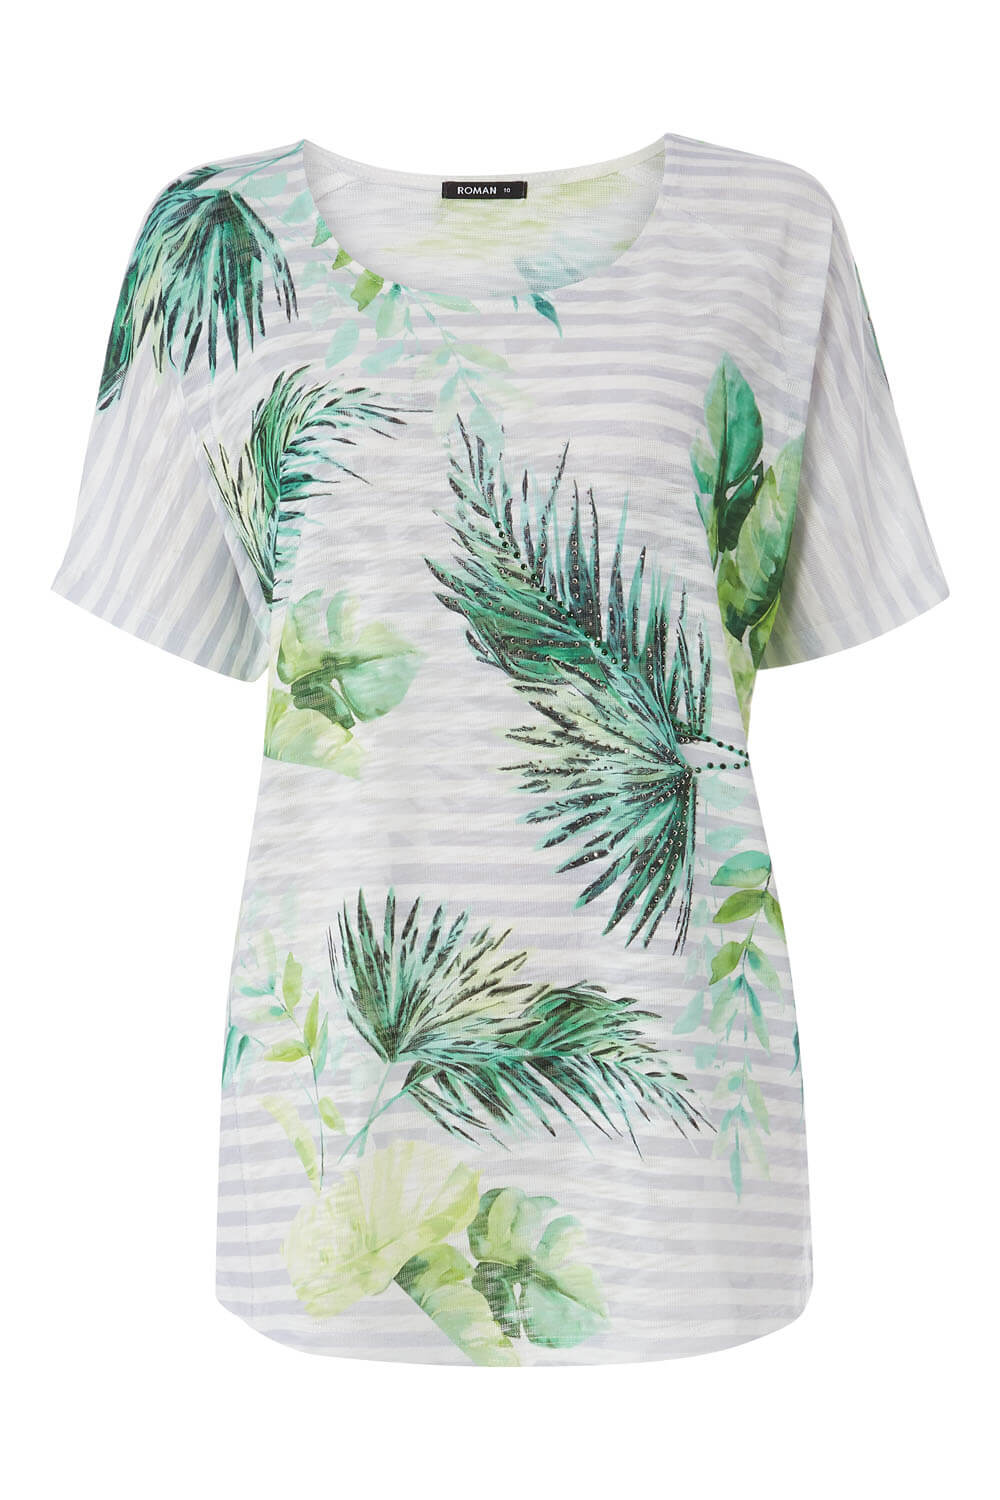 Green Tropical Print Embellished T-Shirt, Image 4 of 4